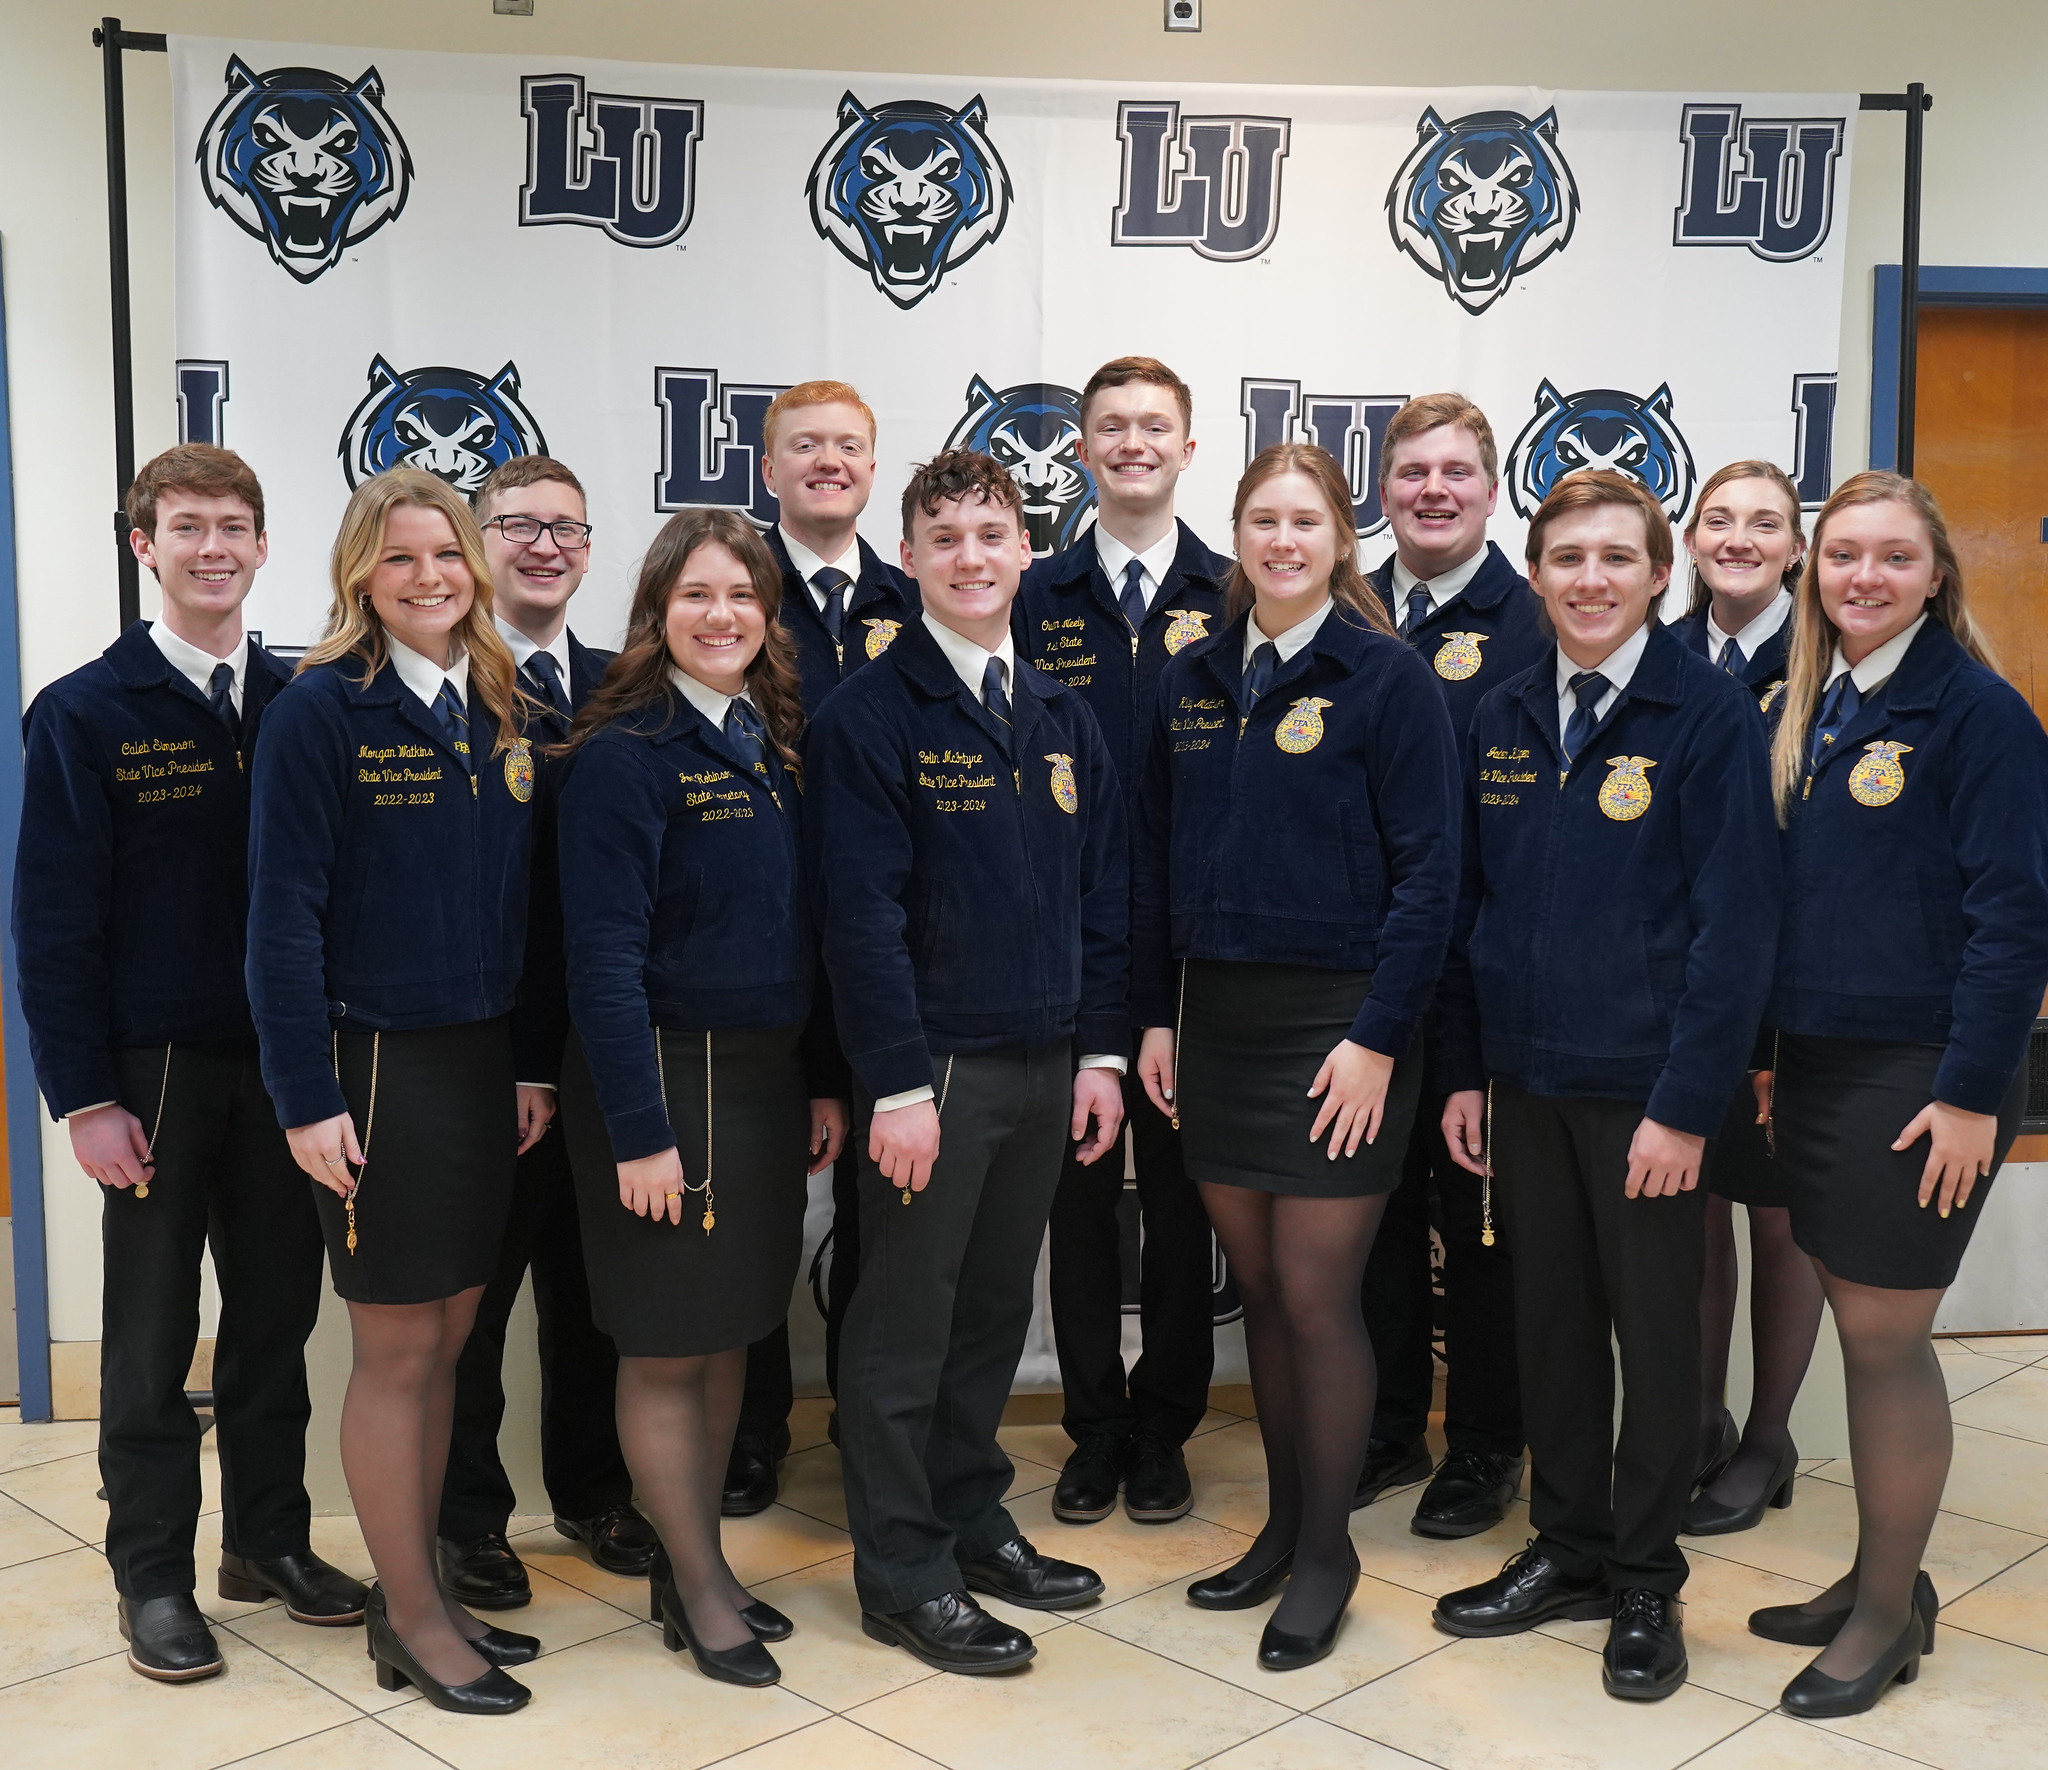 The State FFA Officer Team takes a group photo together at Lincoln University before traveling to other Greenhand Conferences across the state. 